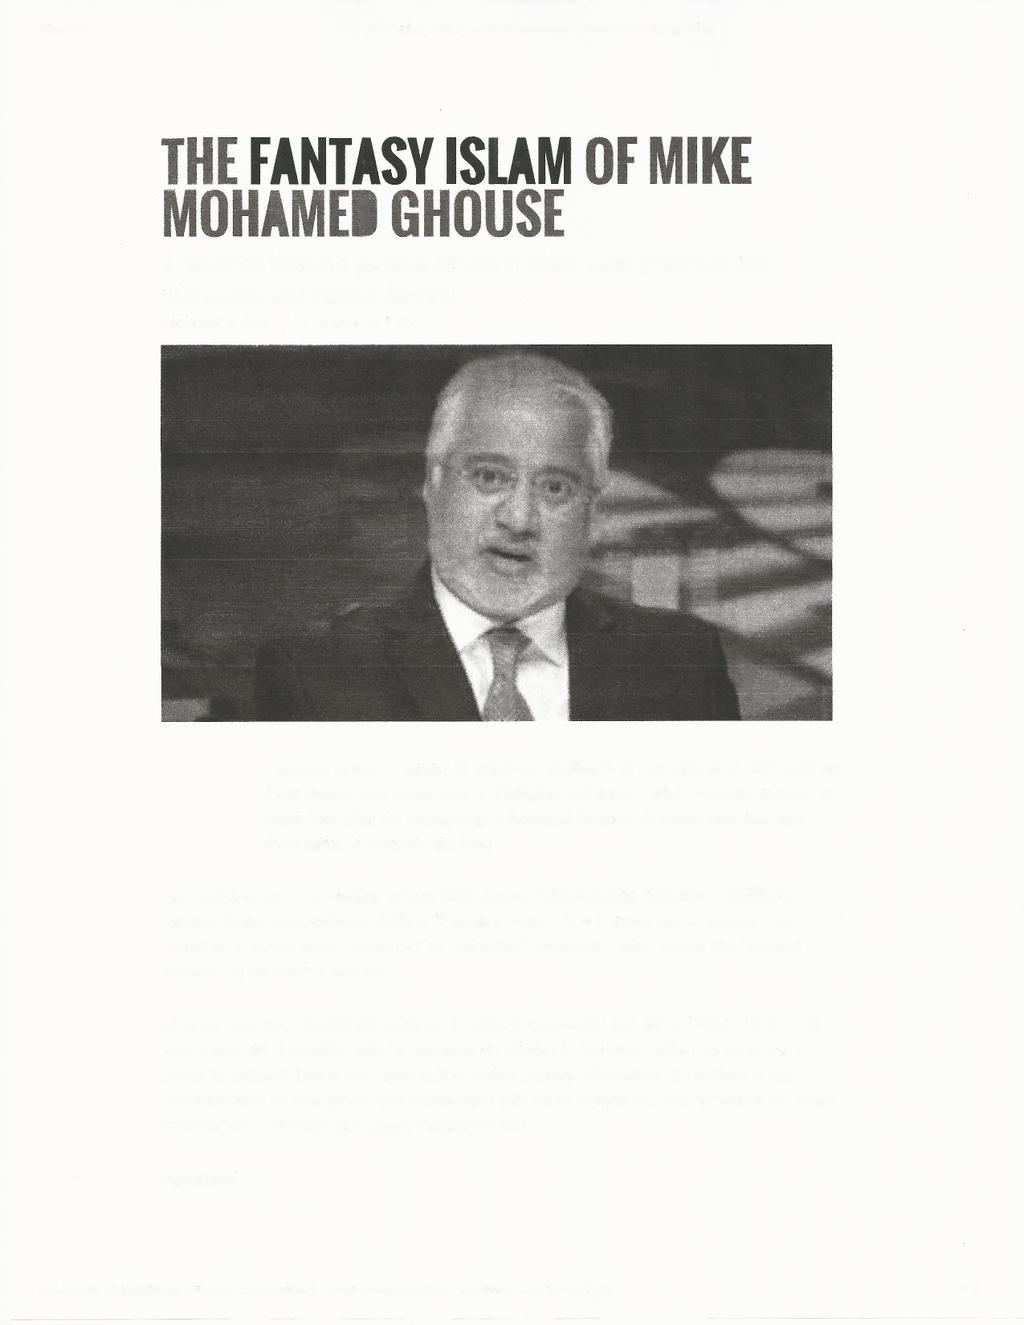 THE FANTASY ISLAM OF MIKE MOHAMED GHOUSE A moderate Muslim's personal version of Islam -- and its curious non relationship with Islamic doctrine. September 3, 2015 DL Stephen M.